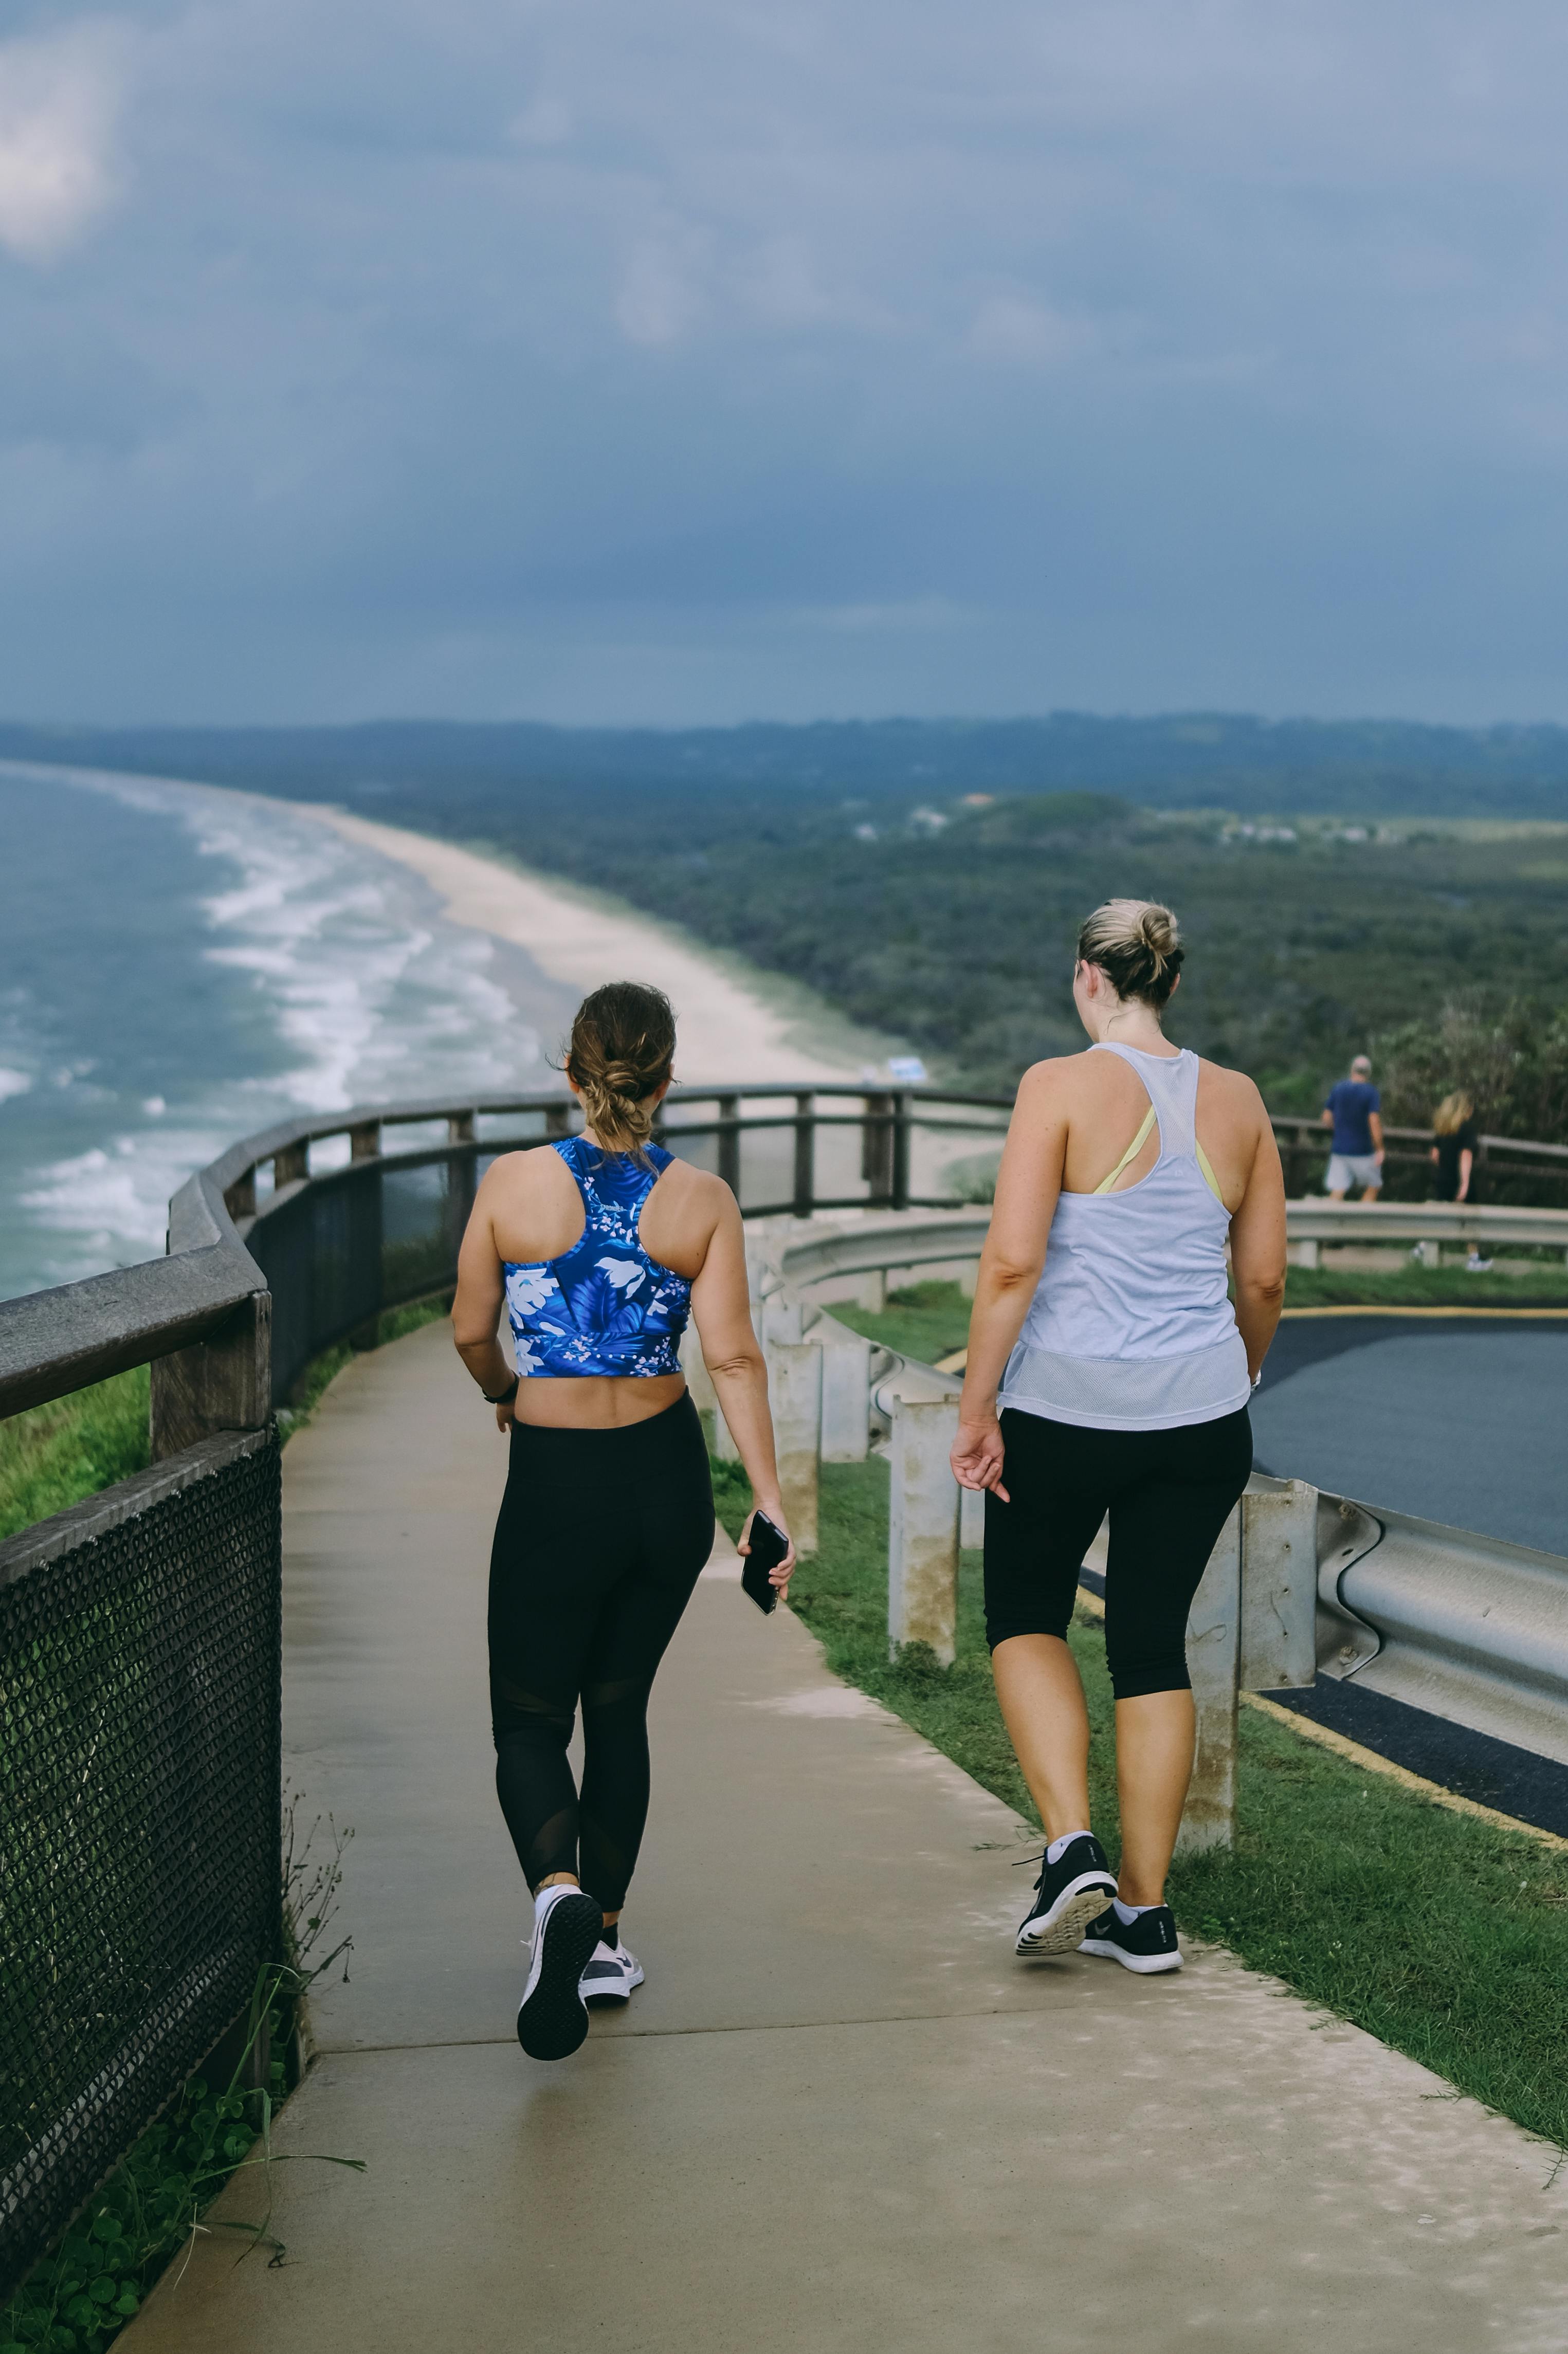 Travel Fitness Tips: Staying Active While Exploring